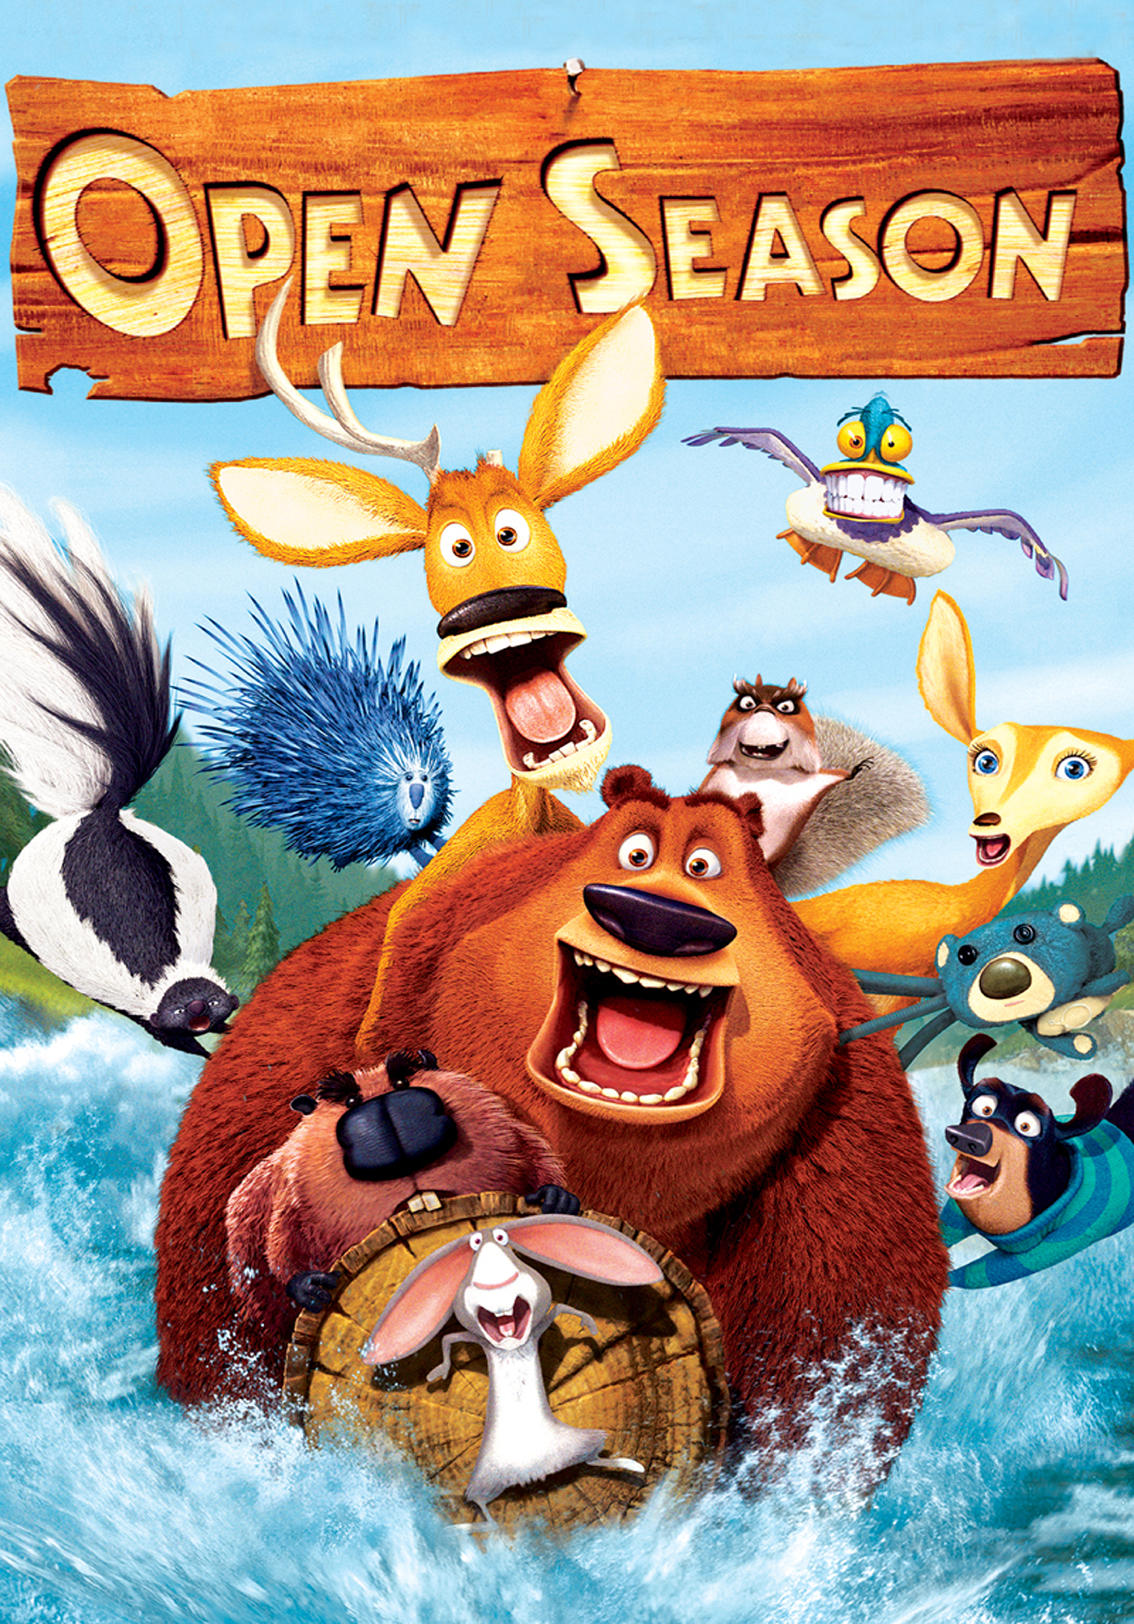 season open 2006 dvd elliot movies boog film sony kaleidescape ranger end midnight widescreen animation 2007 animals release hunting animated